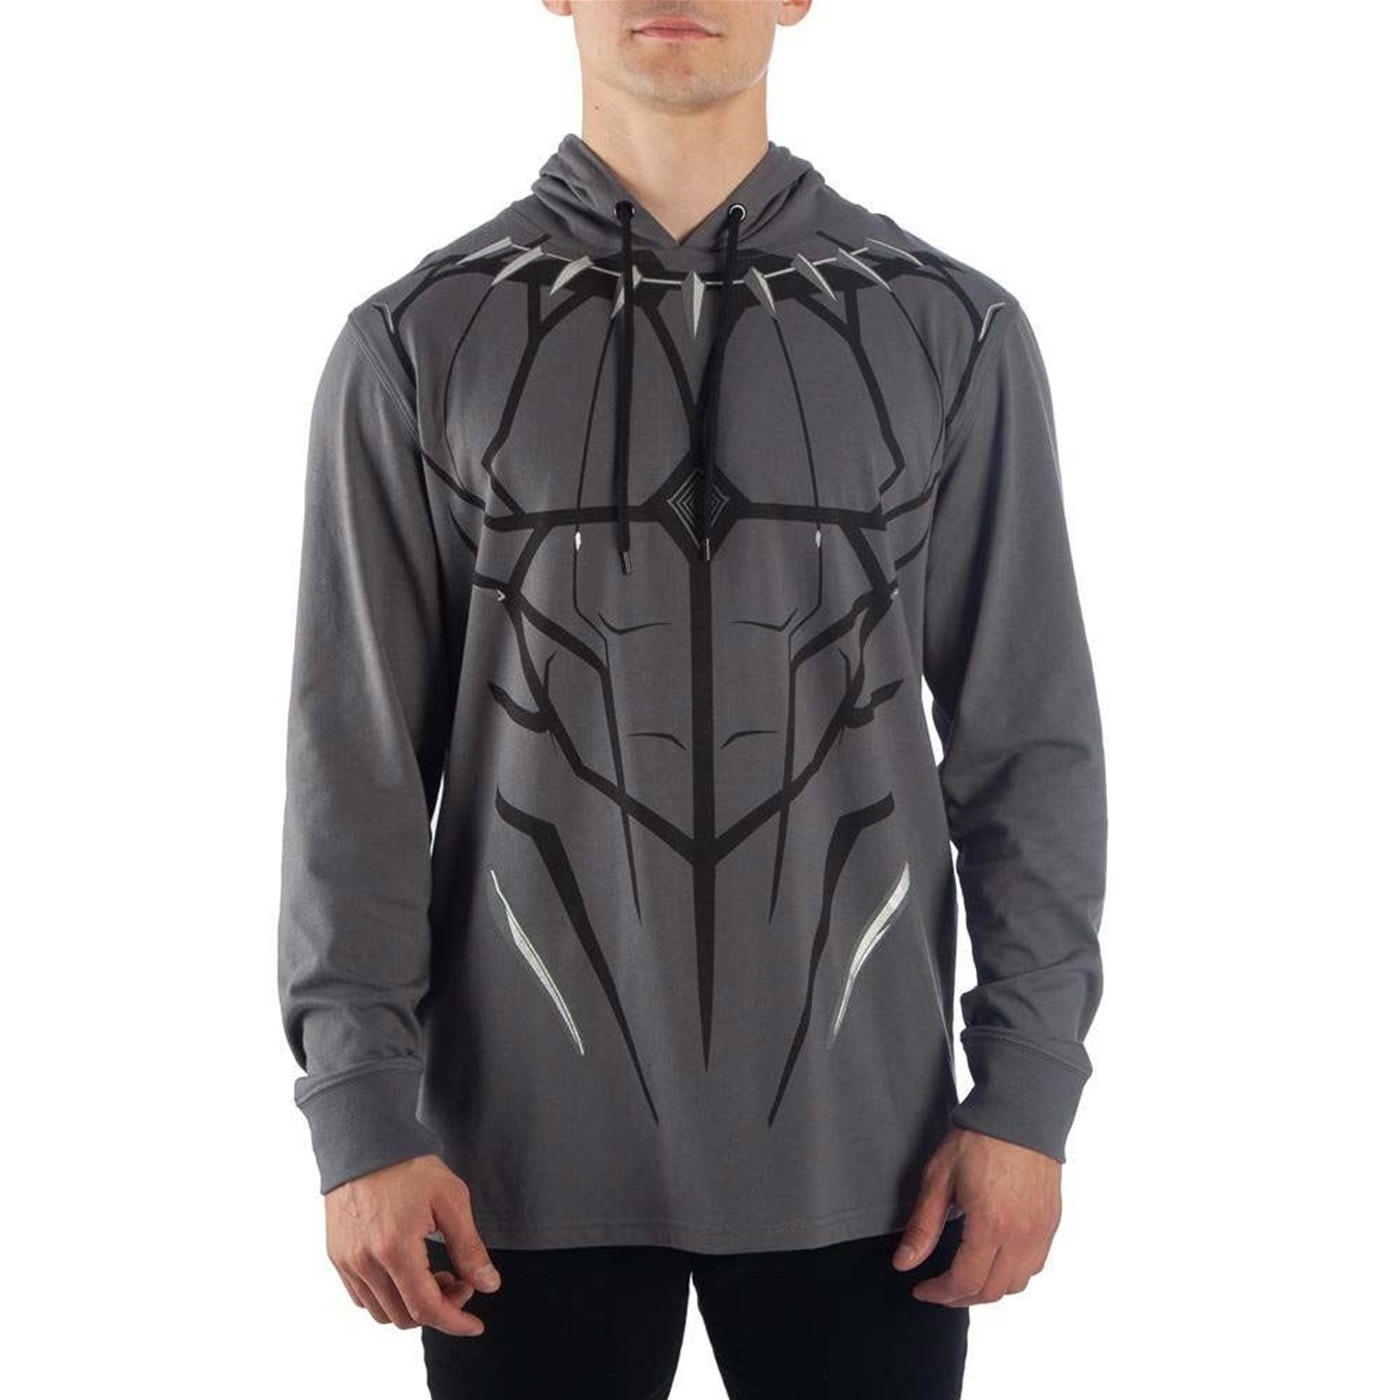 Black Panther Costume Light Weight Hoodie